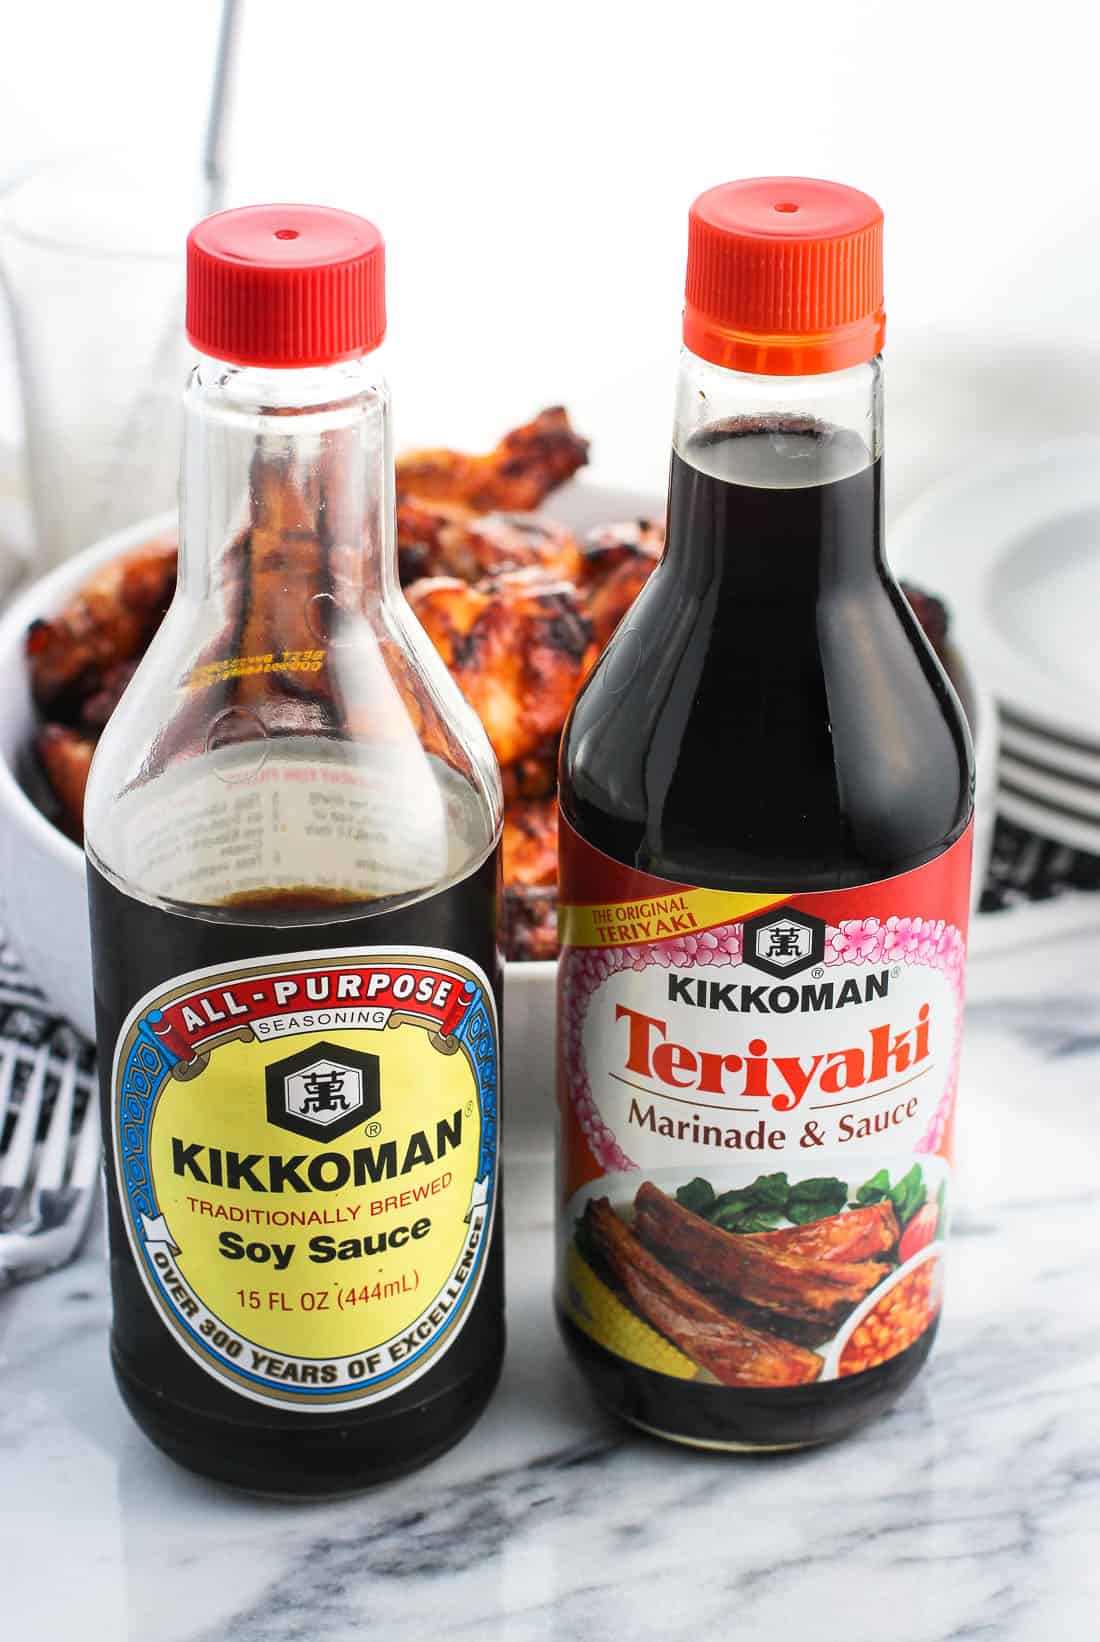 A bottle of Kikkoman soy sauce (left) and Teriyaki sauce (right) in front of the wings.